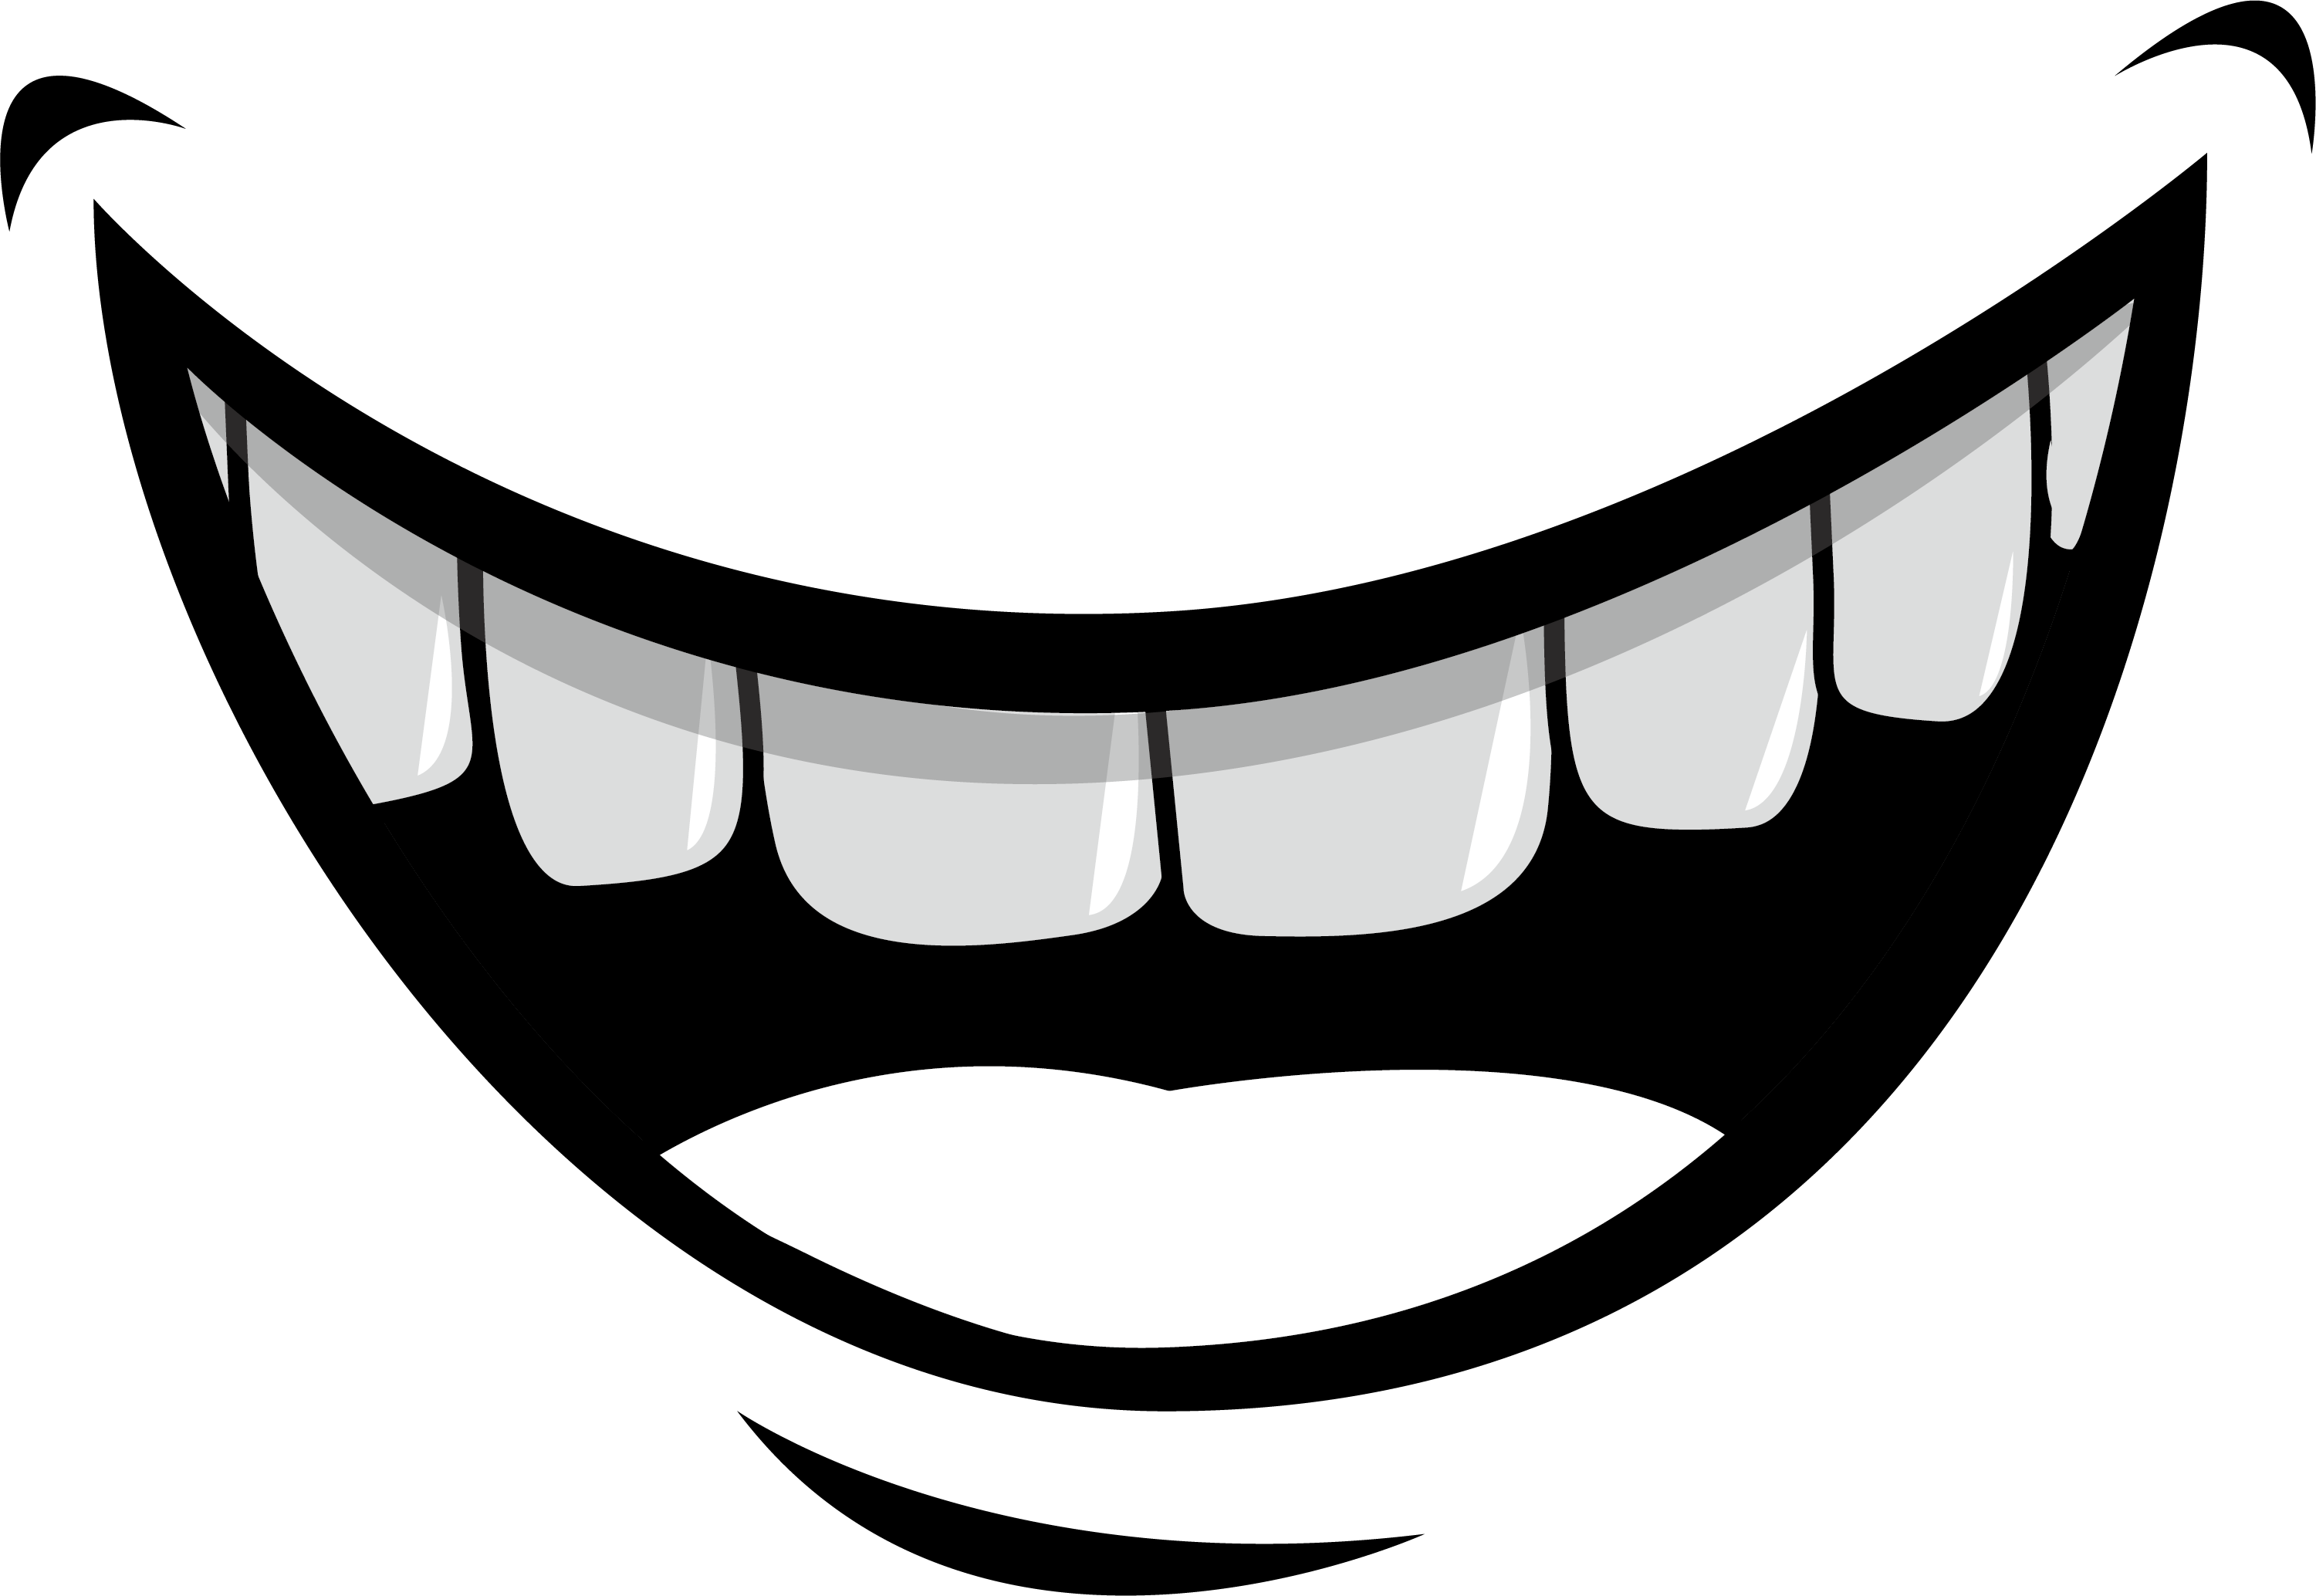 Mouth Lip Tooth Illustration - Smile Mouth Cartoon (3001x2068)